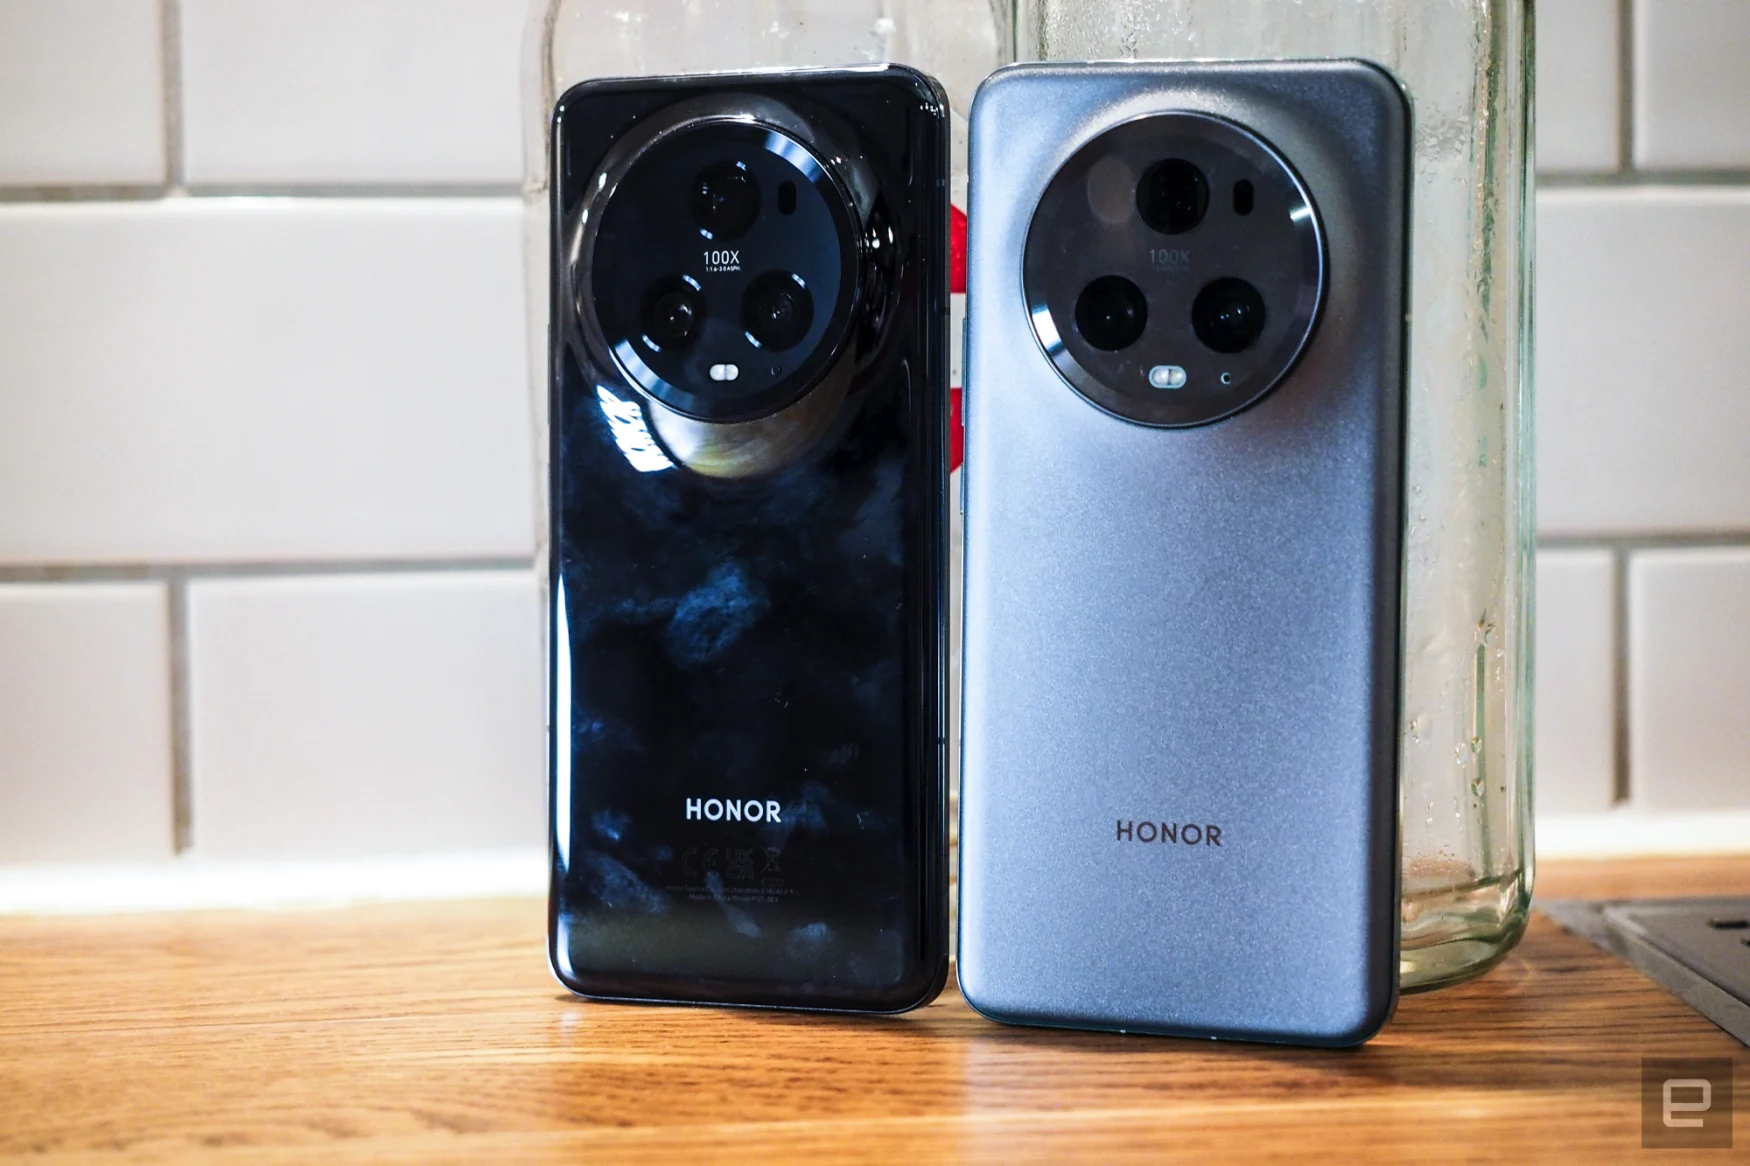 Image of the two colorways of the Honor's Magic 5 Pro side-by-side, including the glossy piano black smudged with fingerprints (which I had wiped seconds before) and the green version, which looks more like gasoline in the pictures .